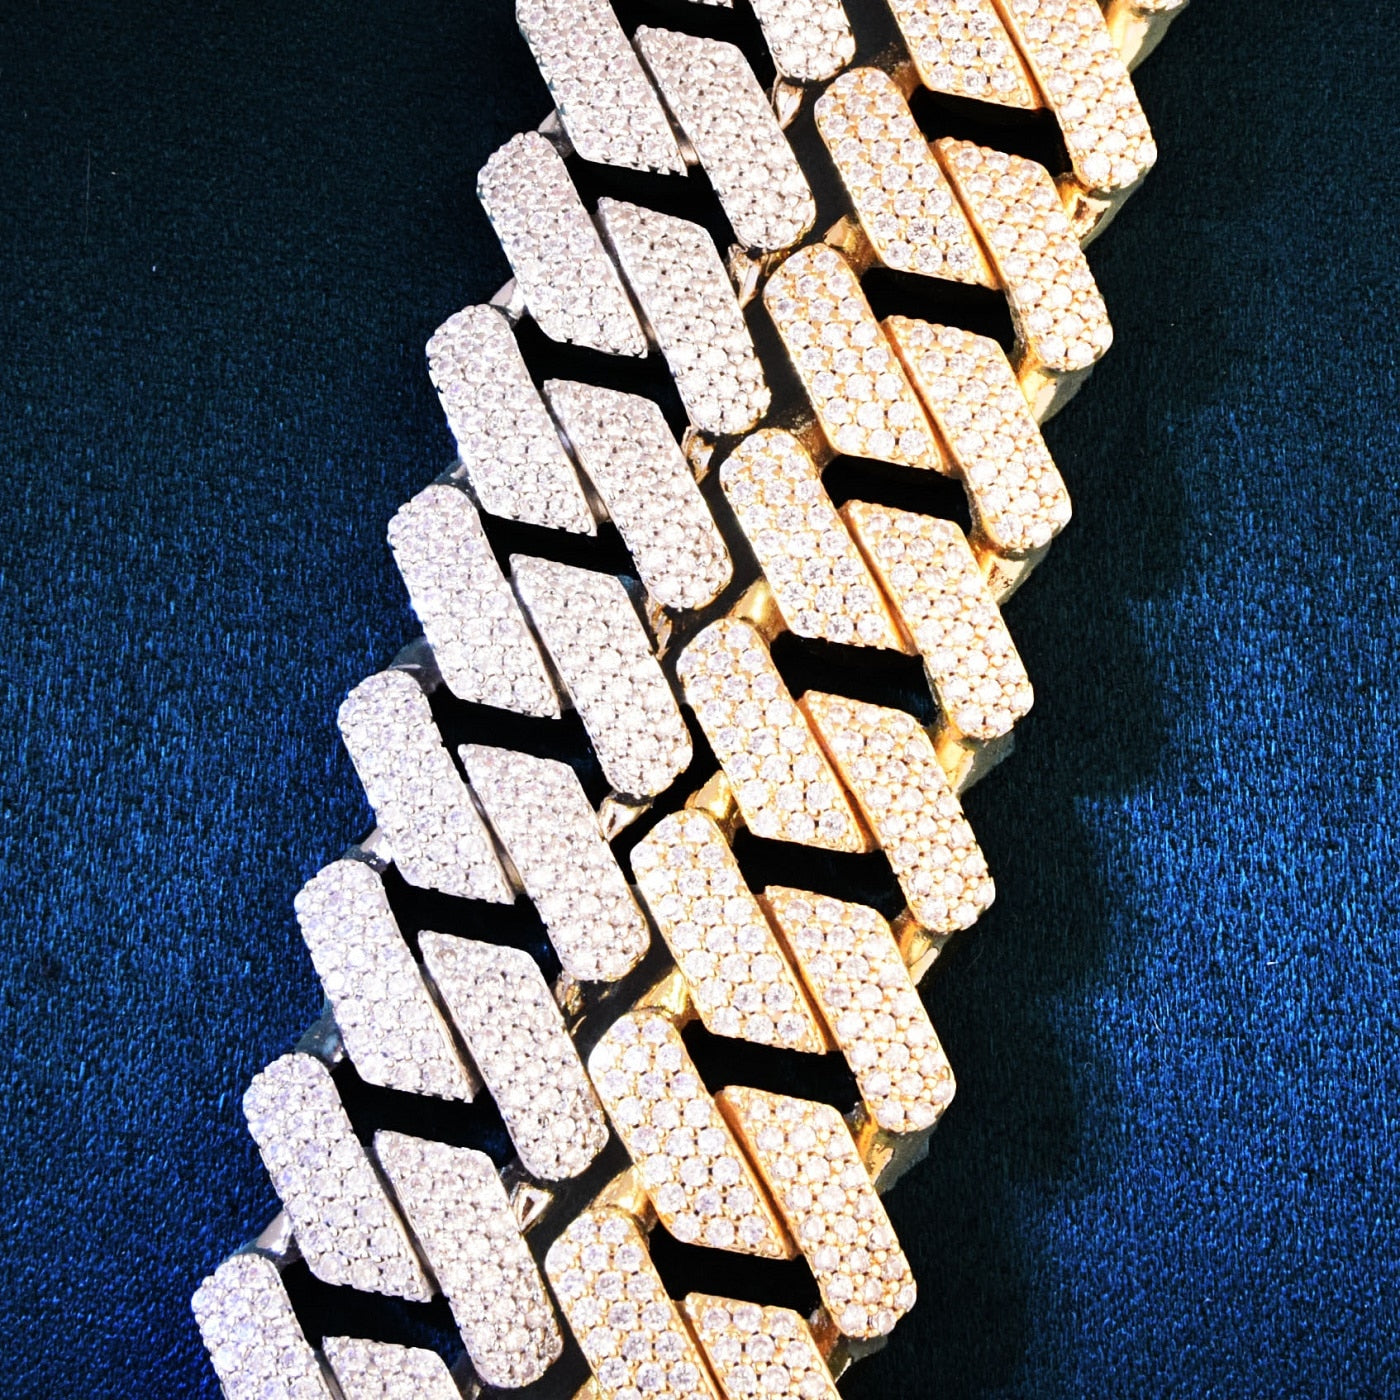 22mm Cuban Link Chain | Iced Out Cuban Link Chains